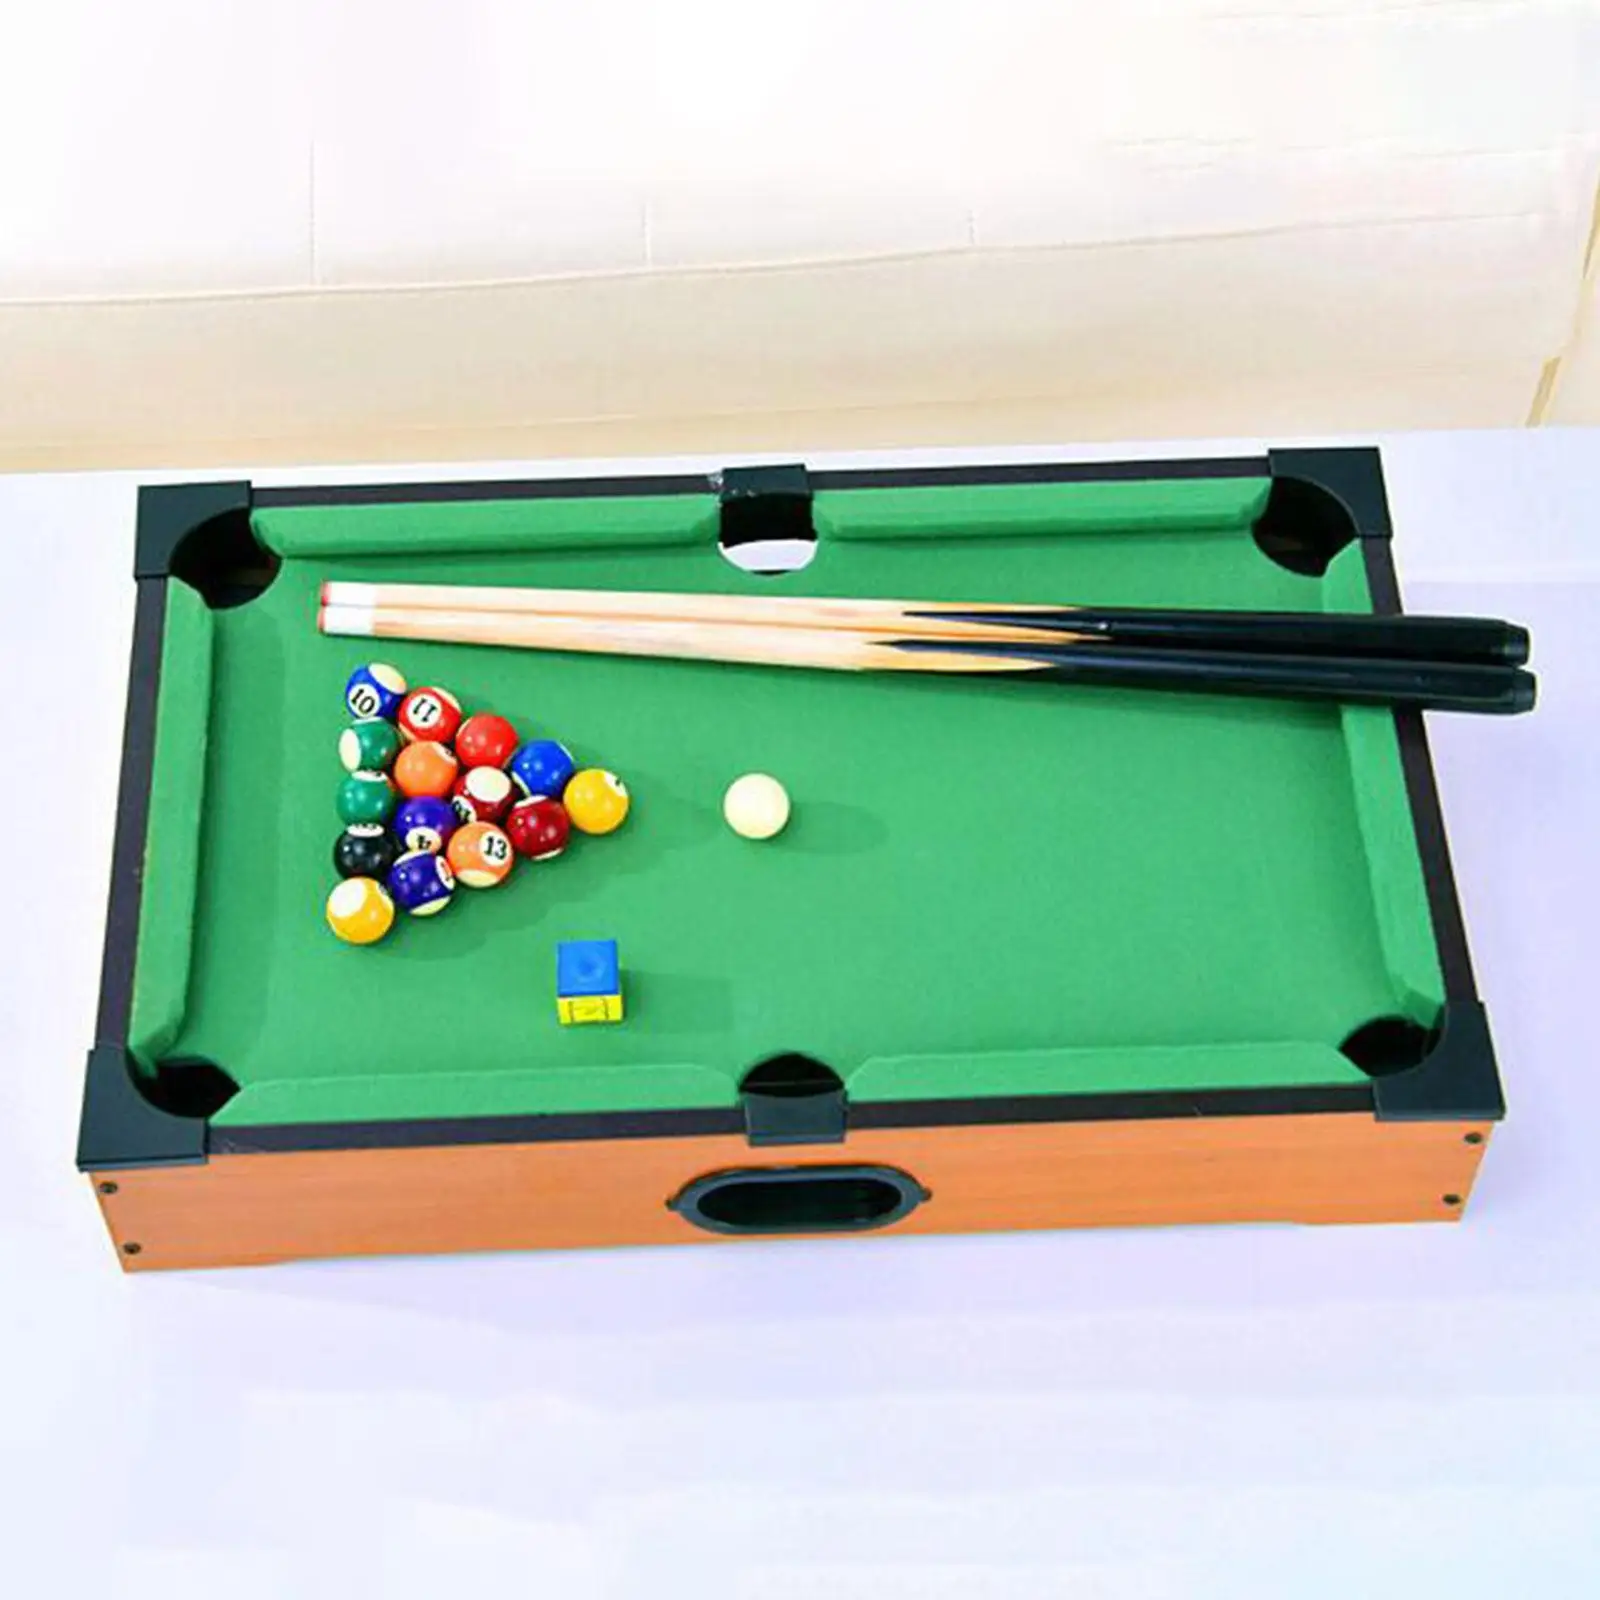 Mini Table Pool Easy to Install Balls Cues Wood for Desktop Playhouse Indoor